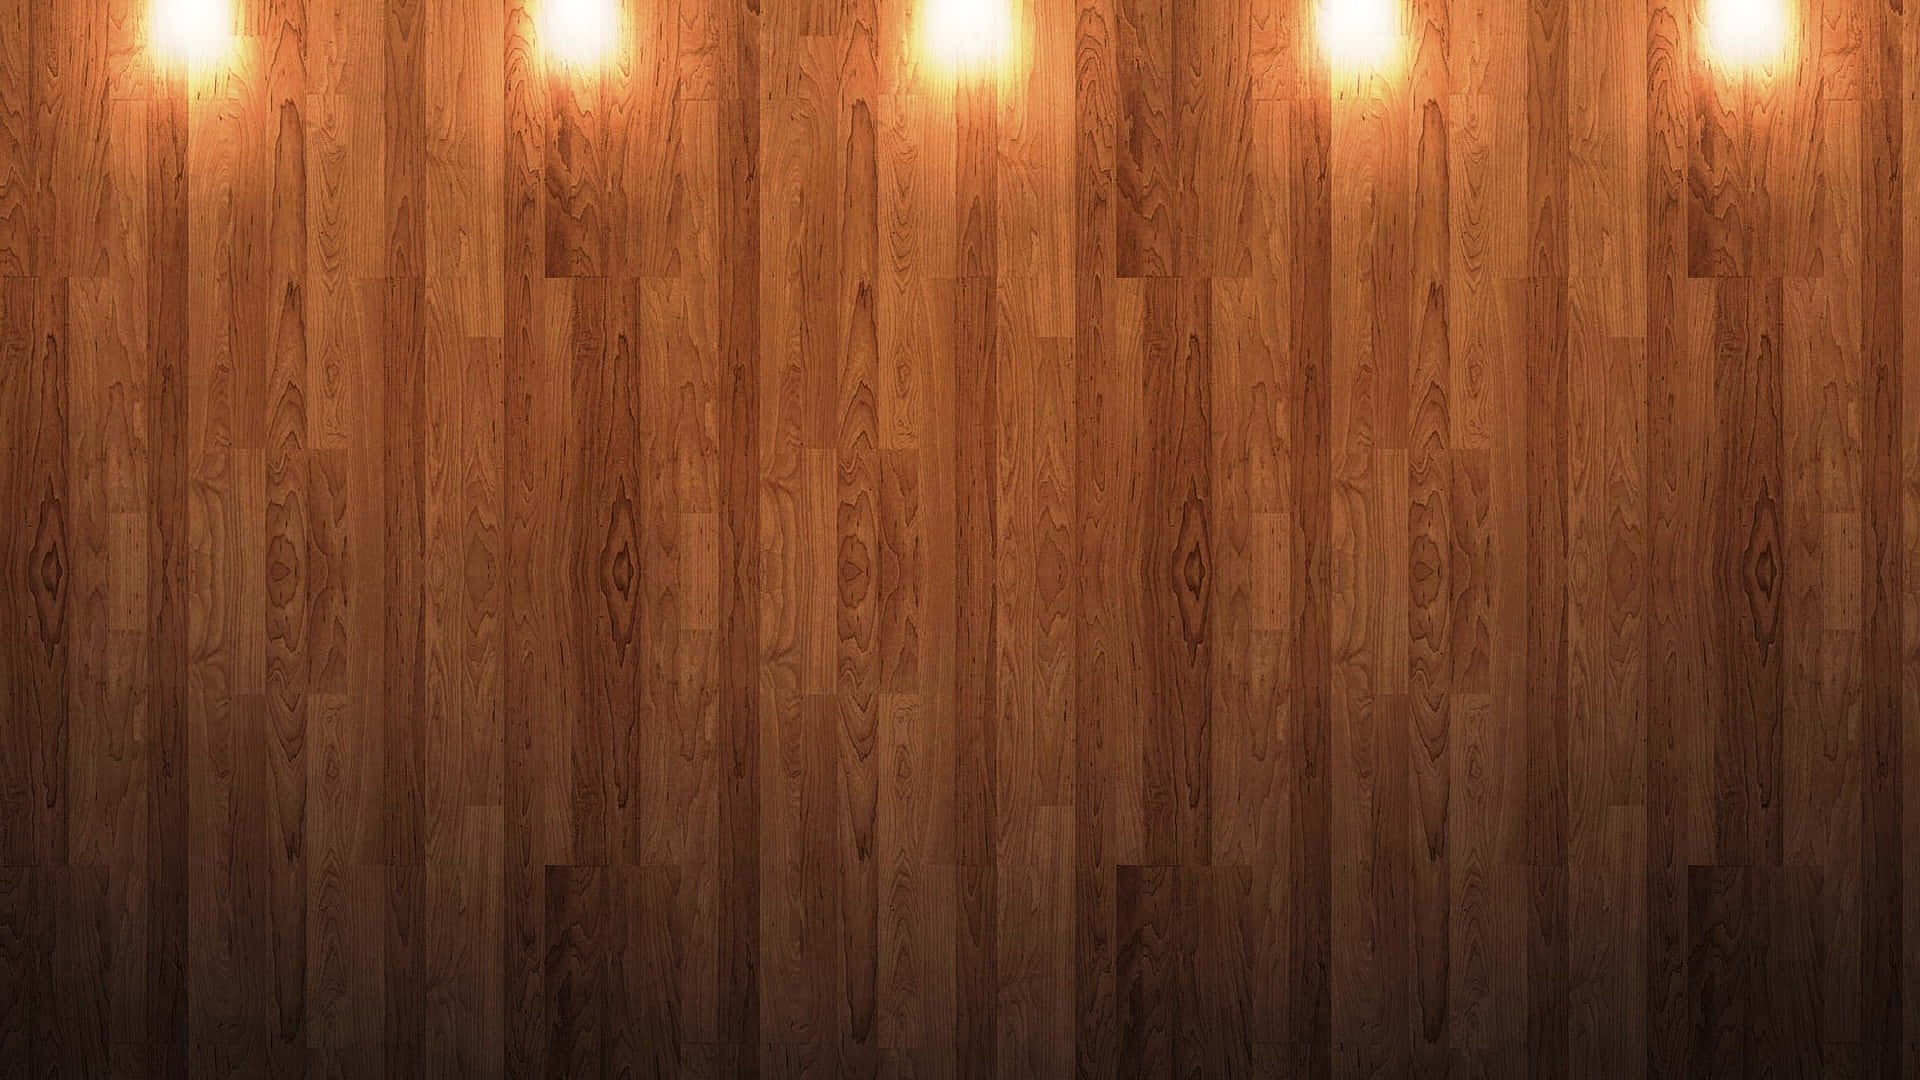 Wood Planks With Lights Wooden Background Wallpaper